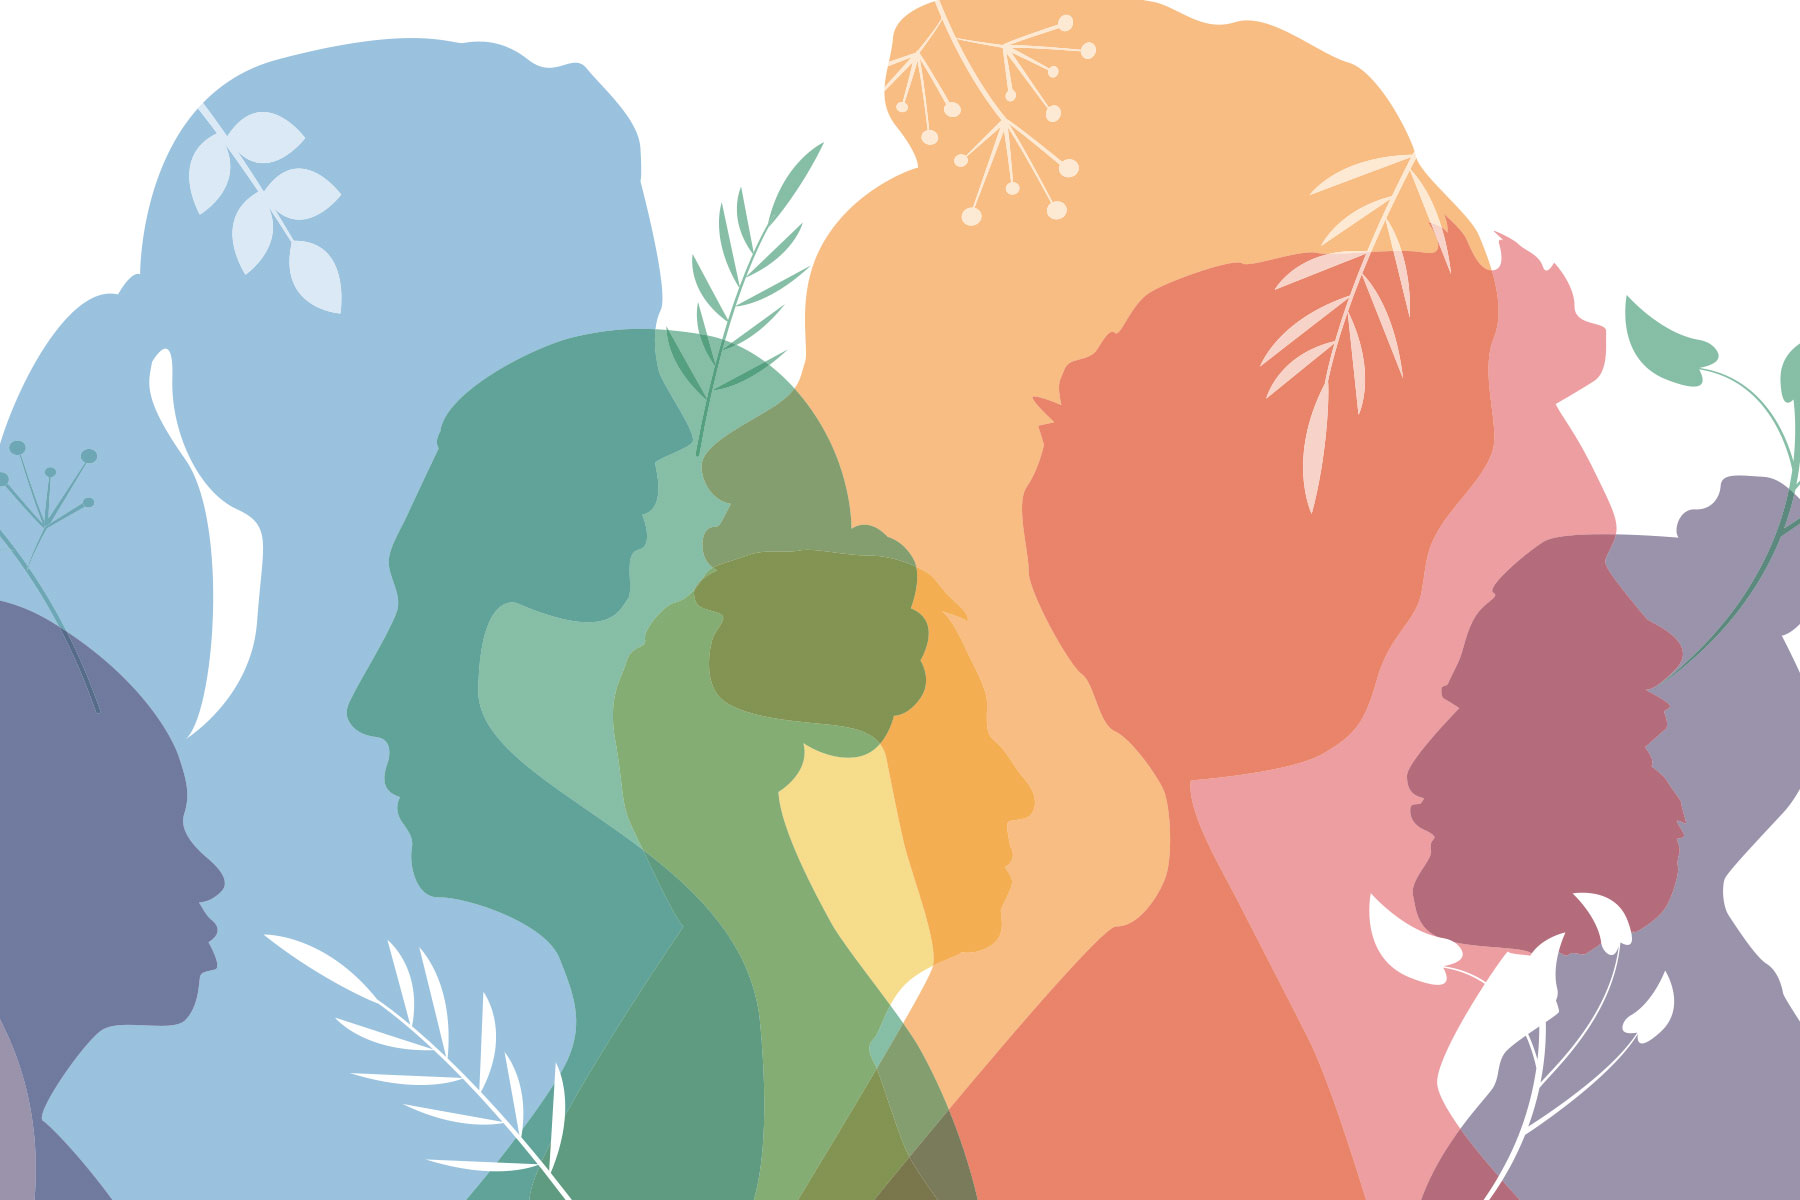 mental health concept, layered illustrated silhouettes of people in rainbow colors